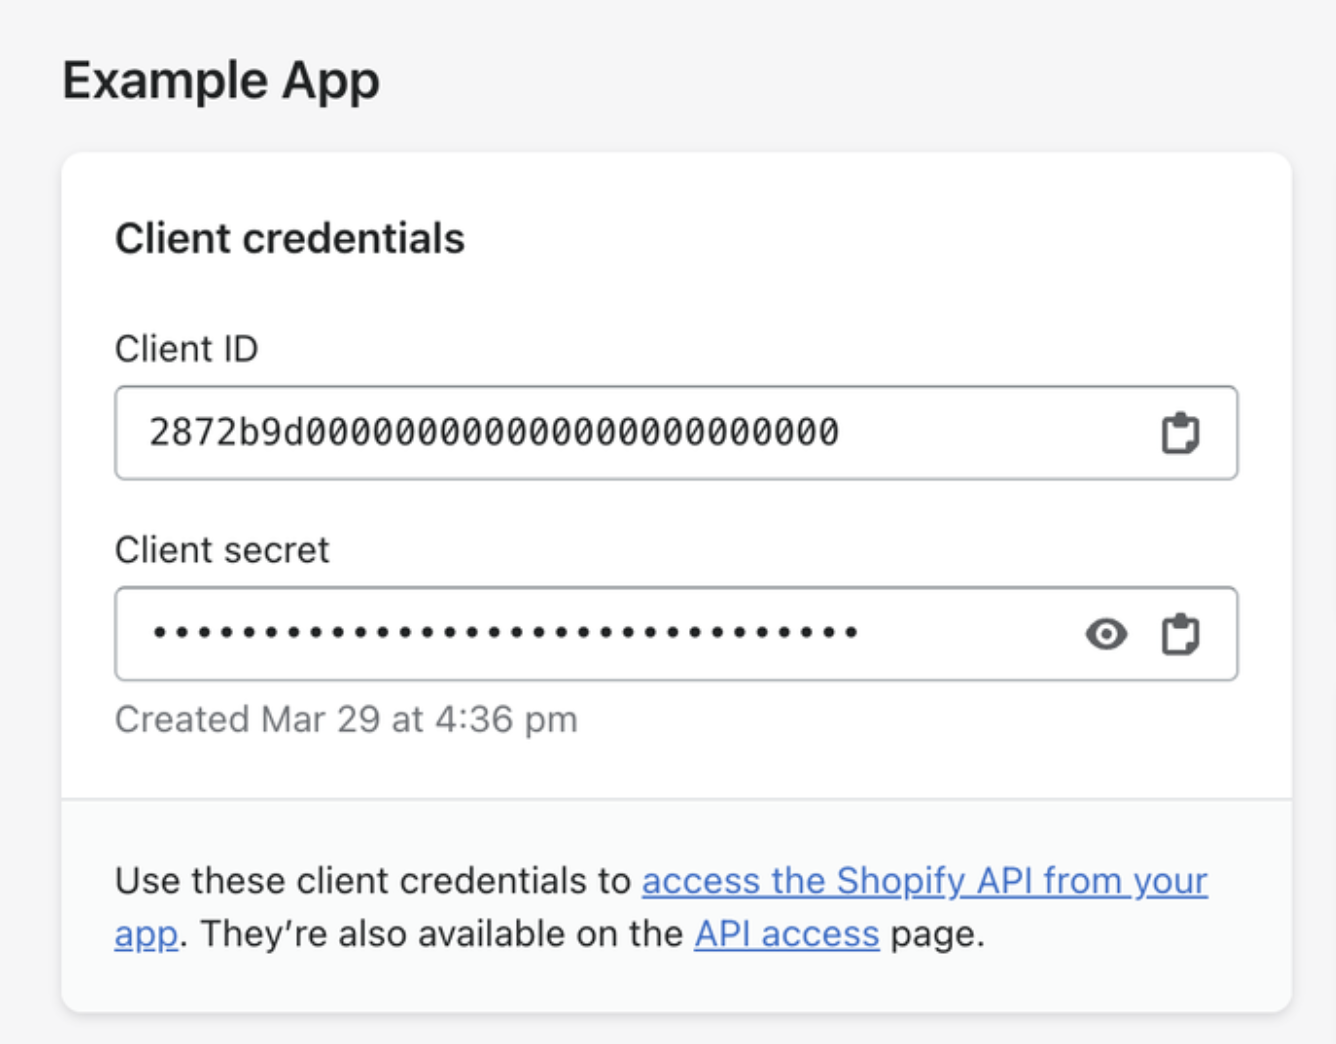 Find client ID and secret in the admin of your Shopify
app.